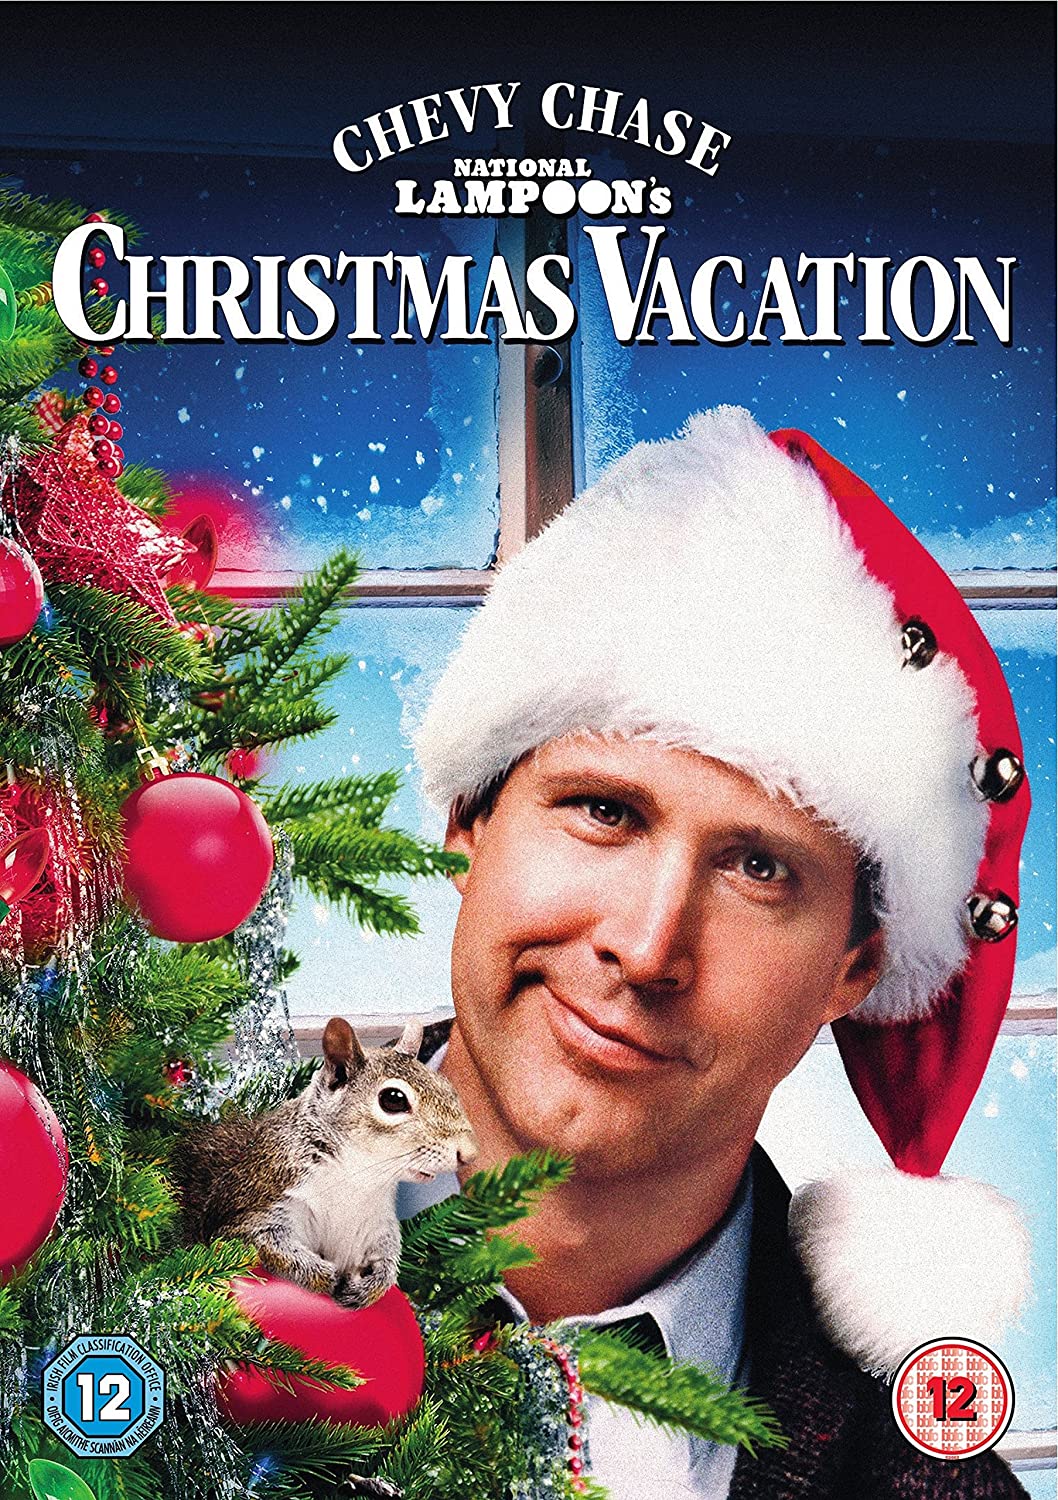 National Lampoon's Christmas Vacation [1989] - Comedy/Slapstick [DVD]